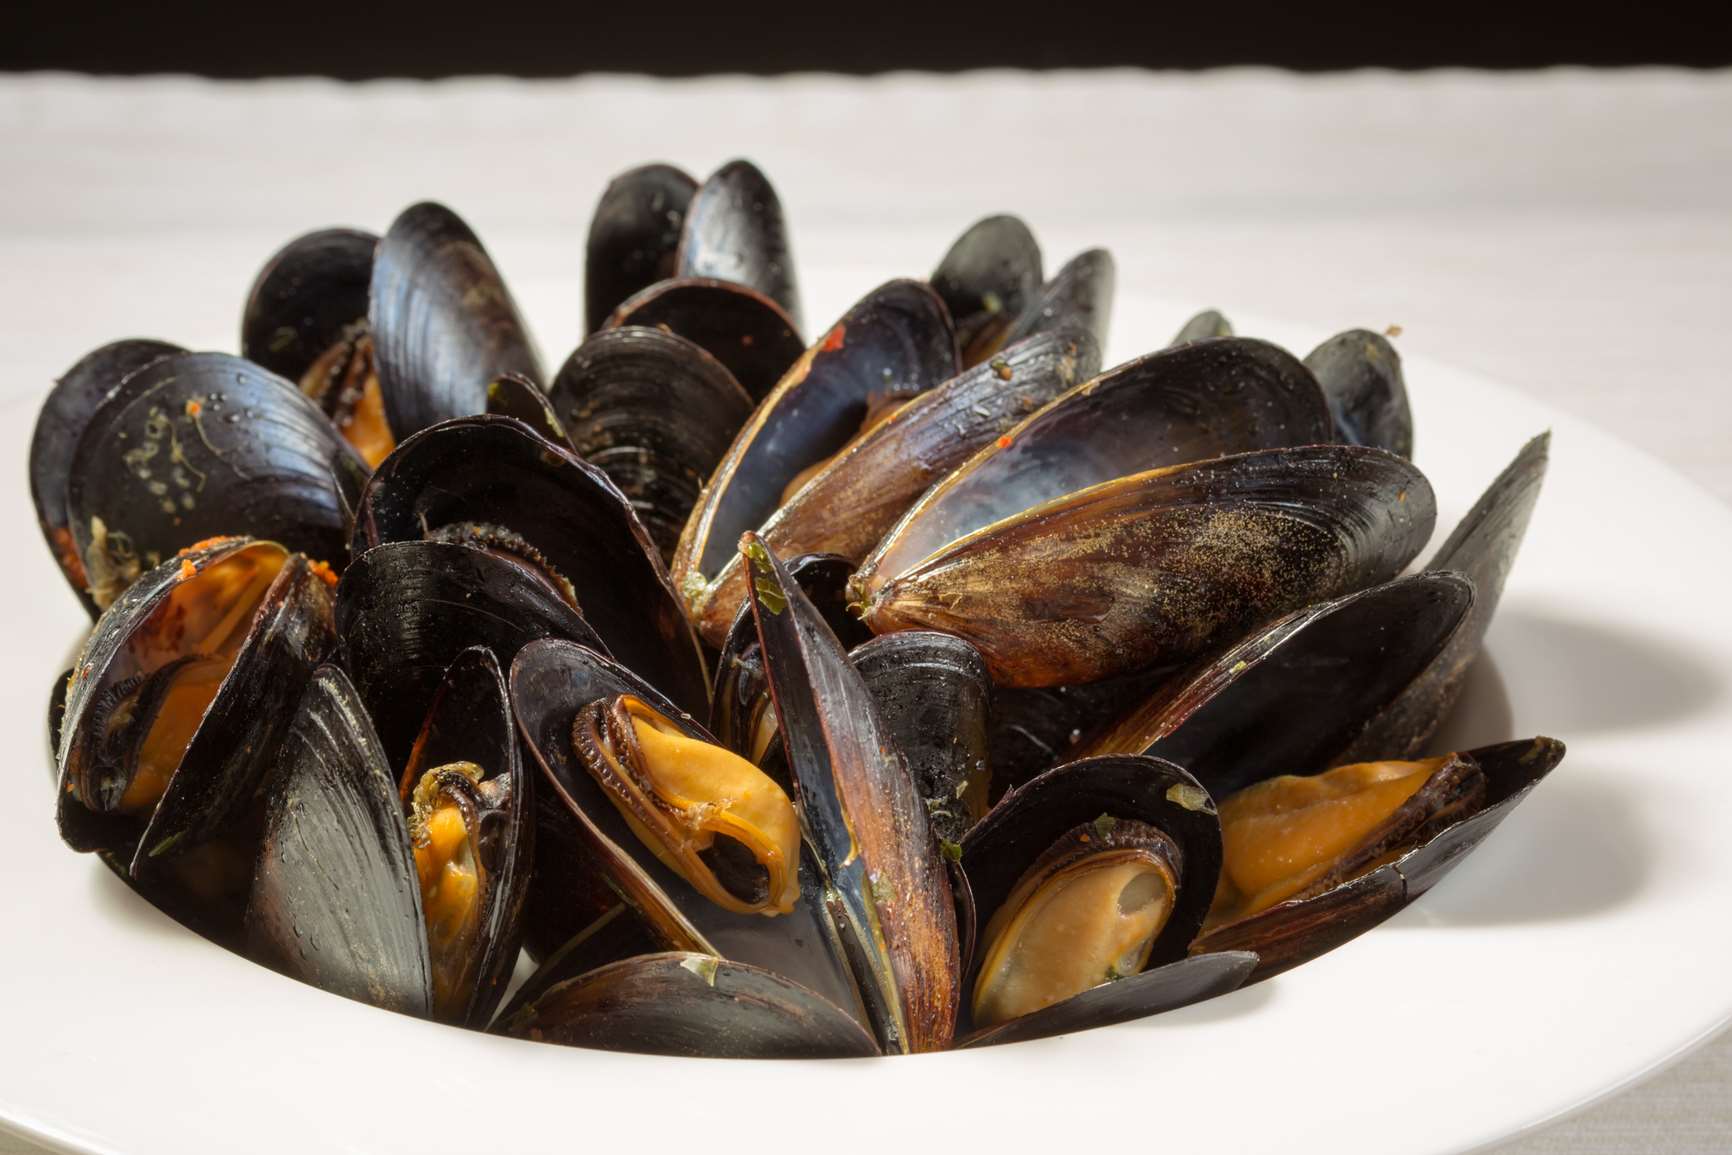 One in 20 under-fives have even tucked into mussels